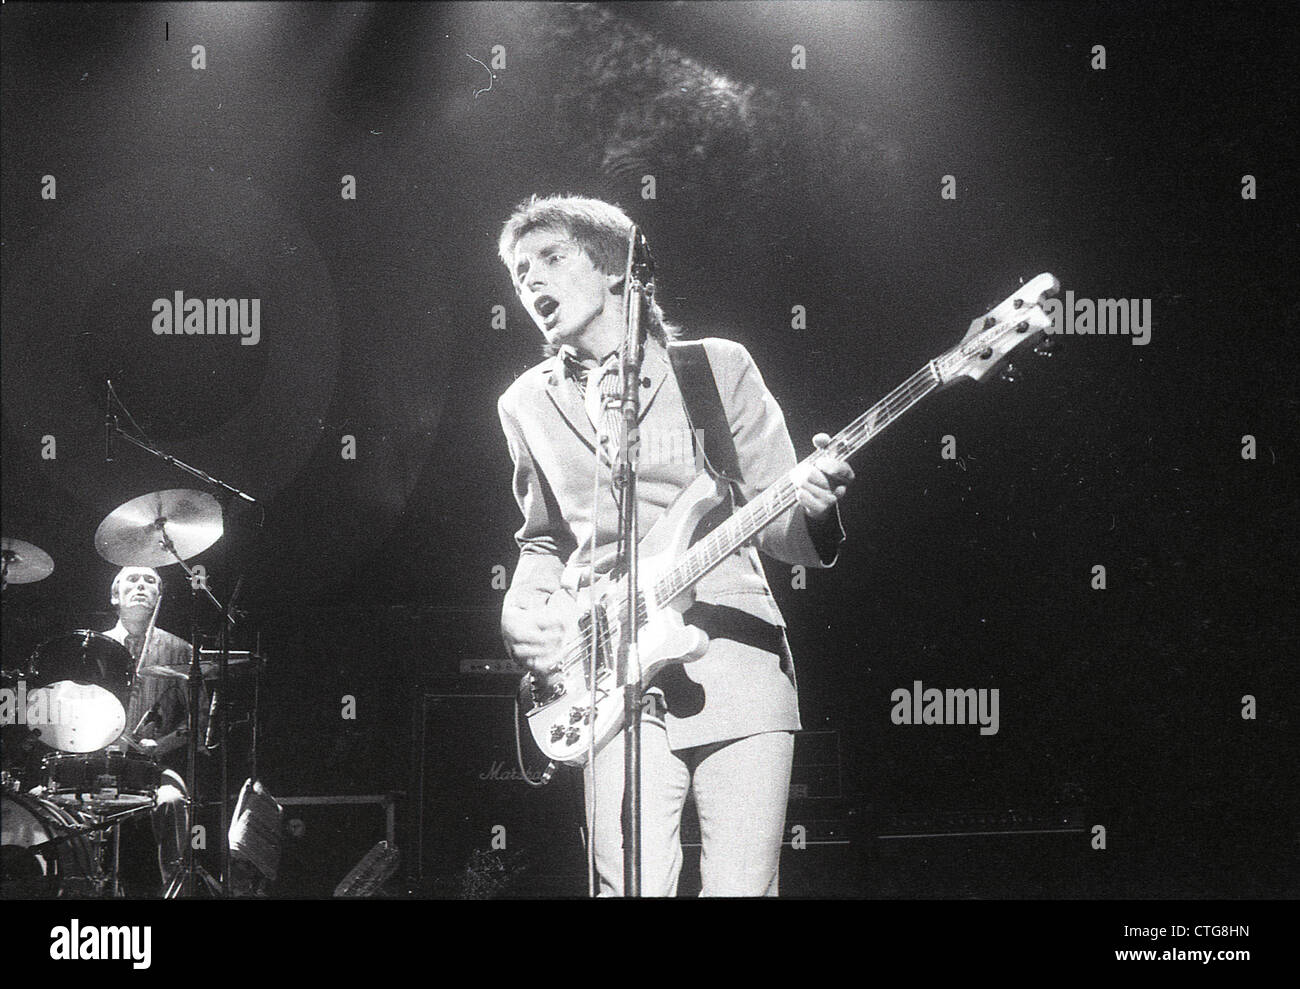 009982 - Paul Weller and Rick Buckler of The Jam in concert in the 1970s Stock Photo